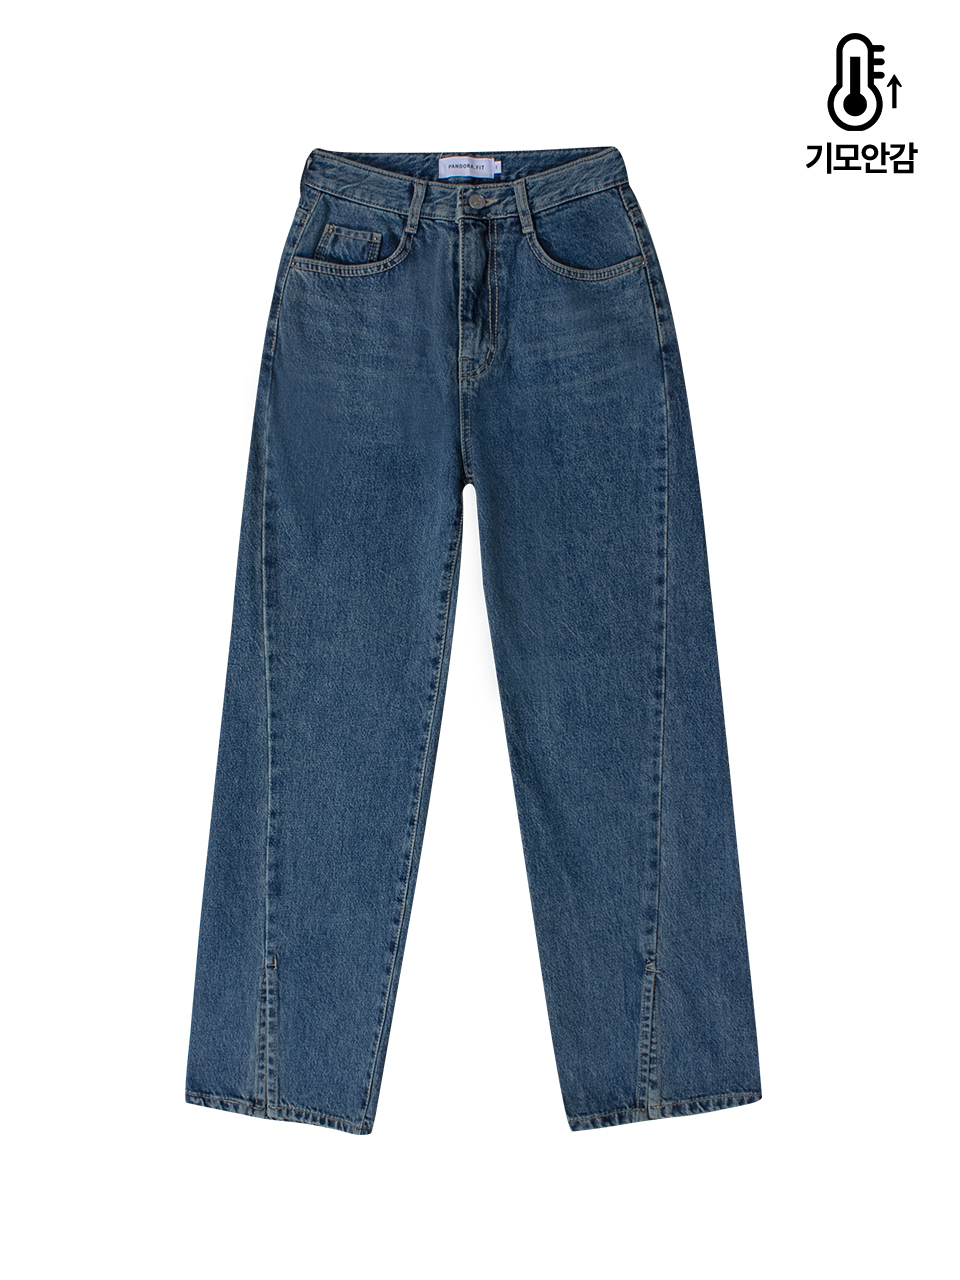 [WIDE] Yet Jeans